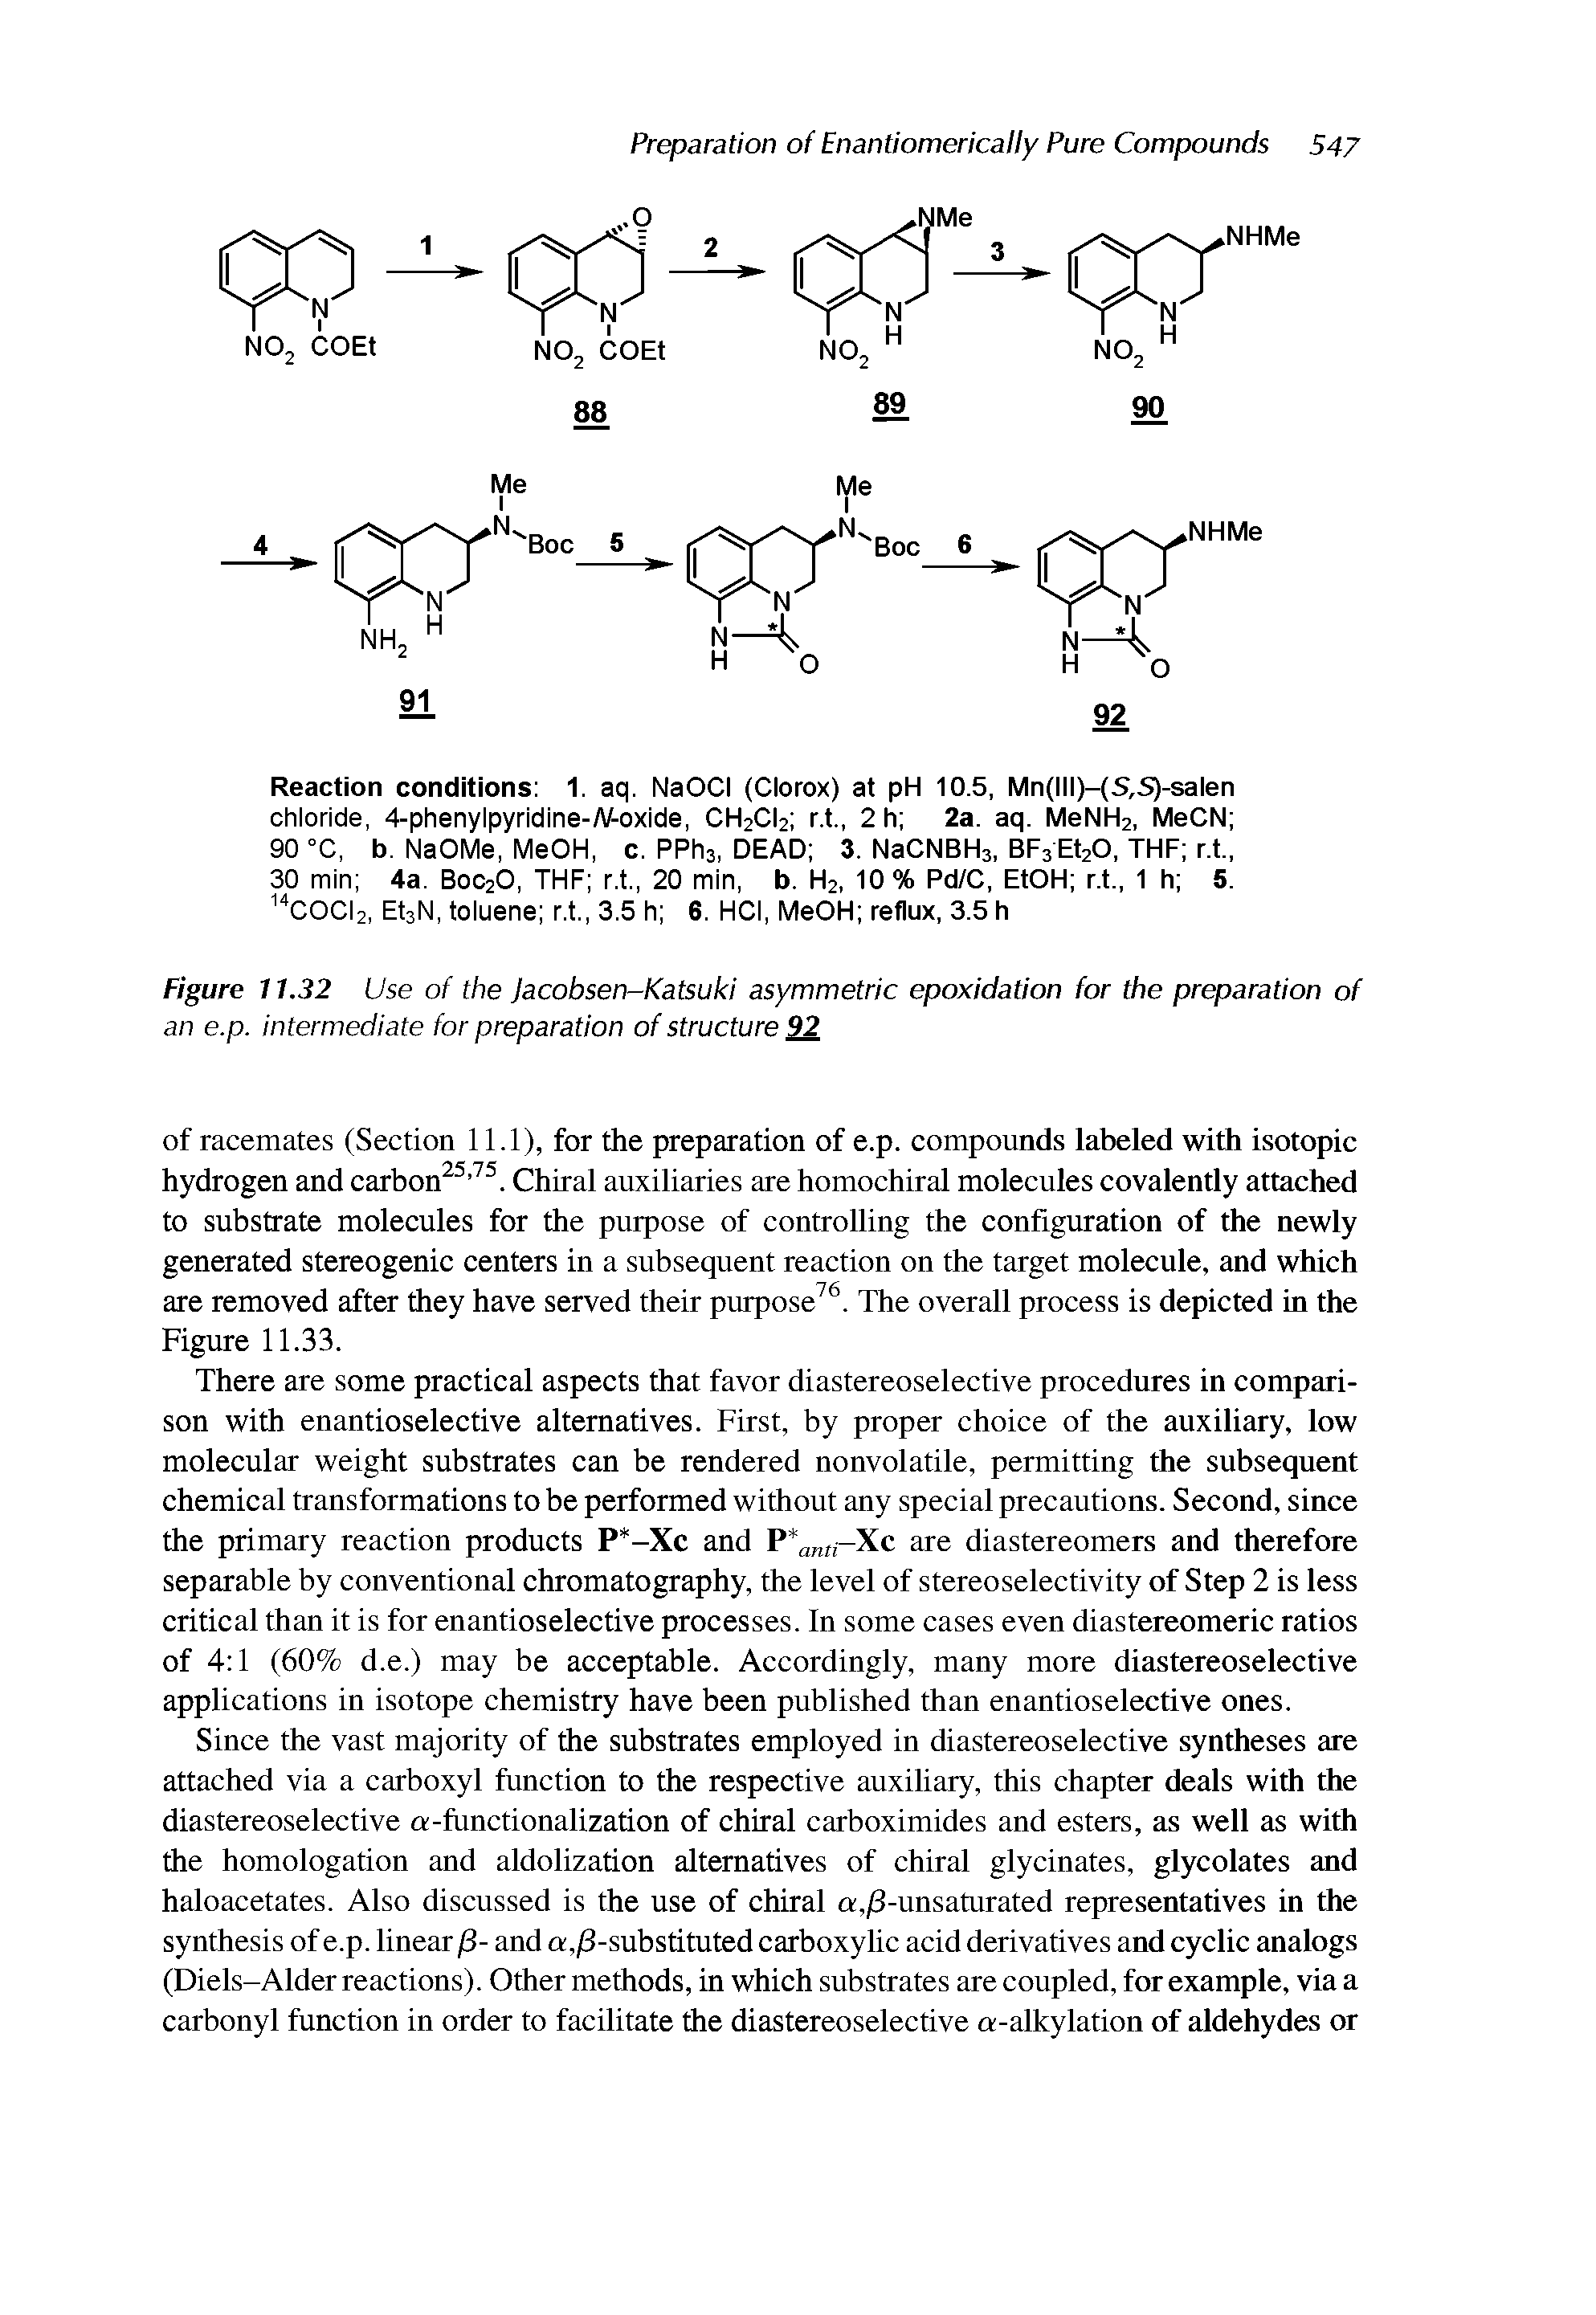 Figure 17.32 Use of the Jacobsen-Katsuki asymmetric epoxidation for the preparation of an e.p. intermediate for preparation of structure 92...